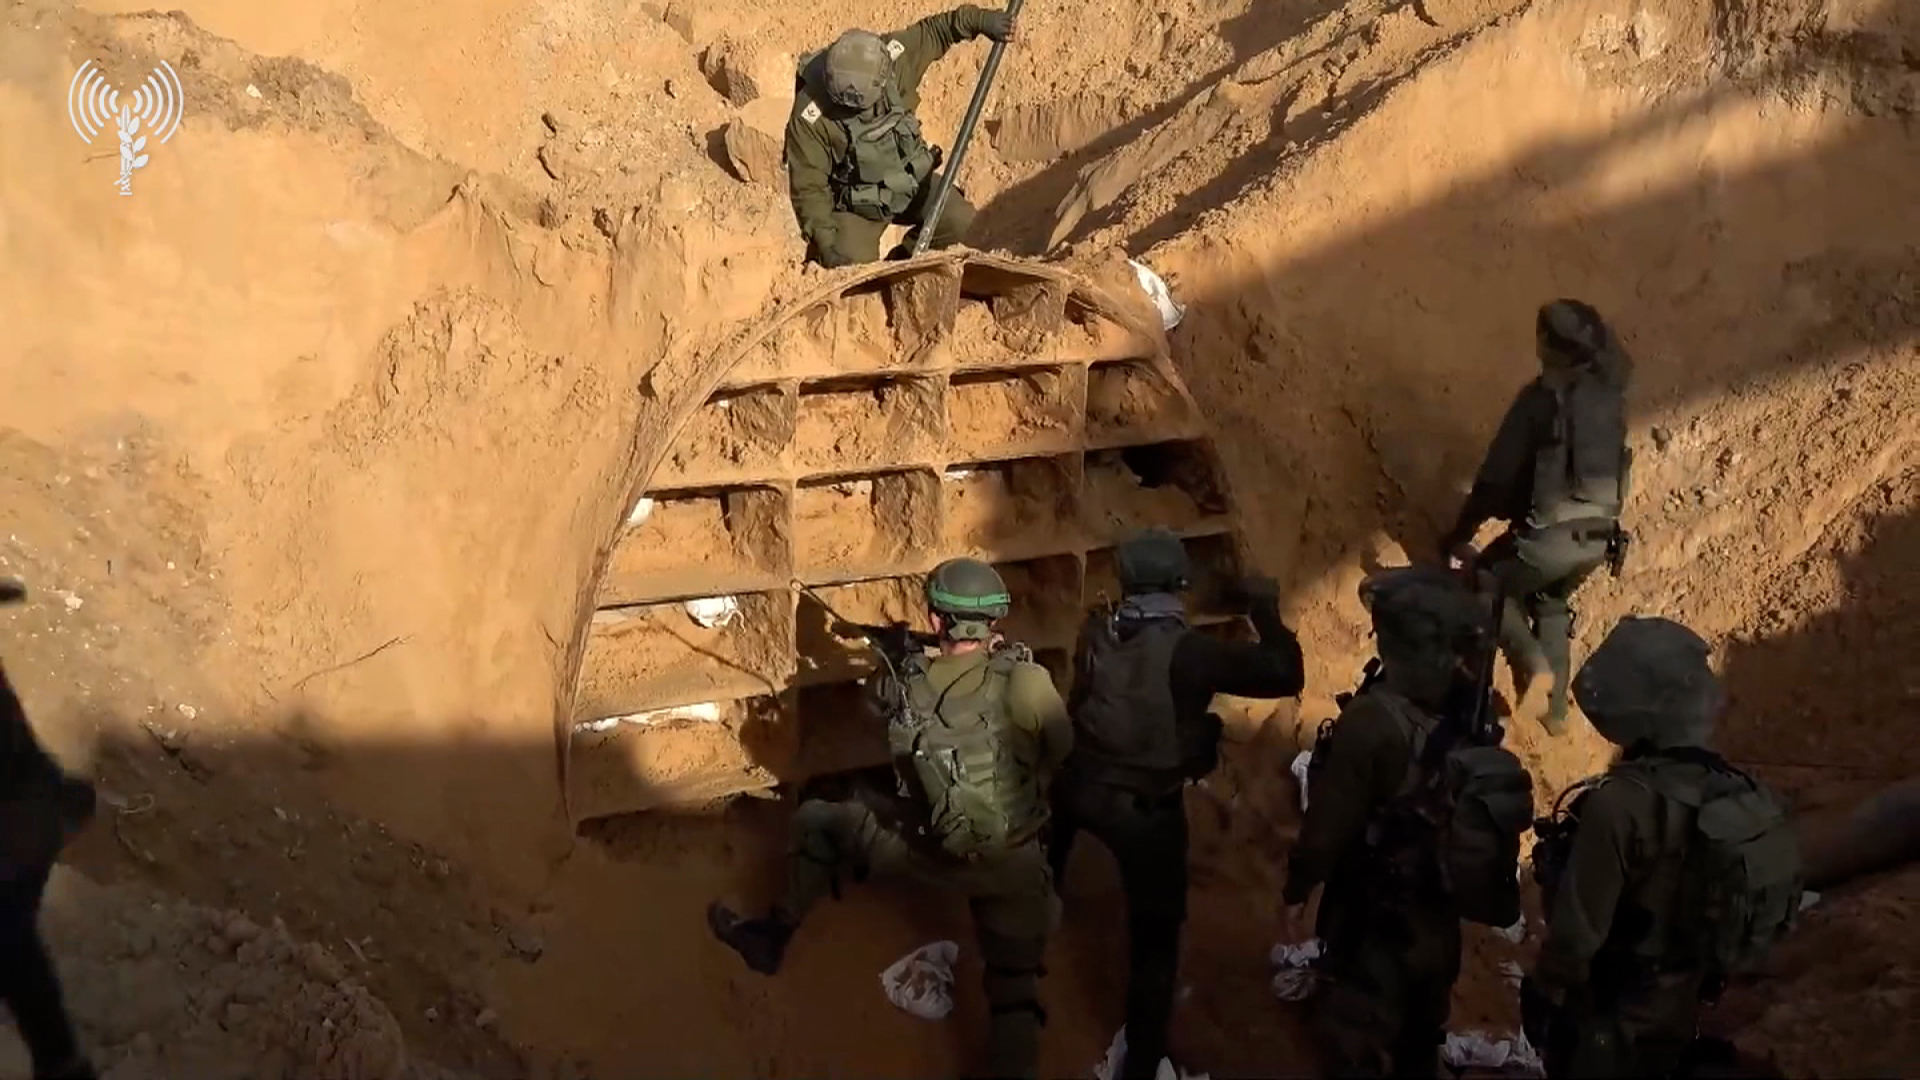 IDF soldiers gain access to a Hamas tunnel in Gaza in this screengrab from an undated video released by the IDF.